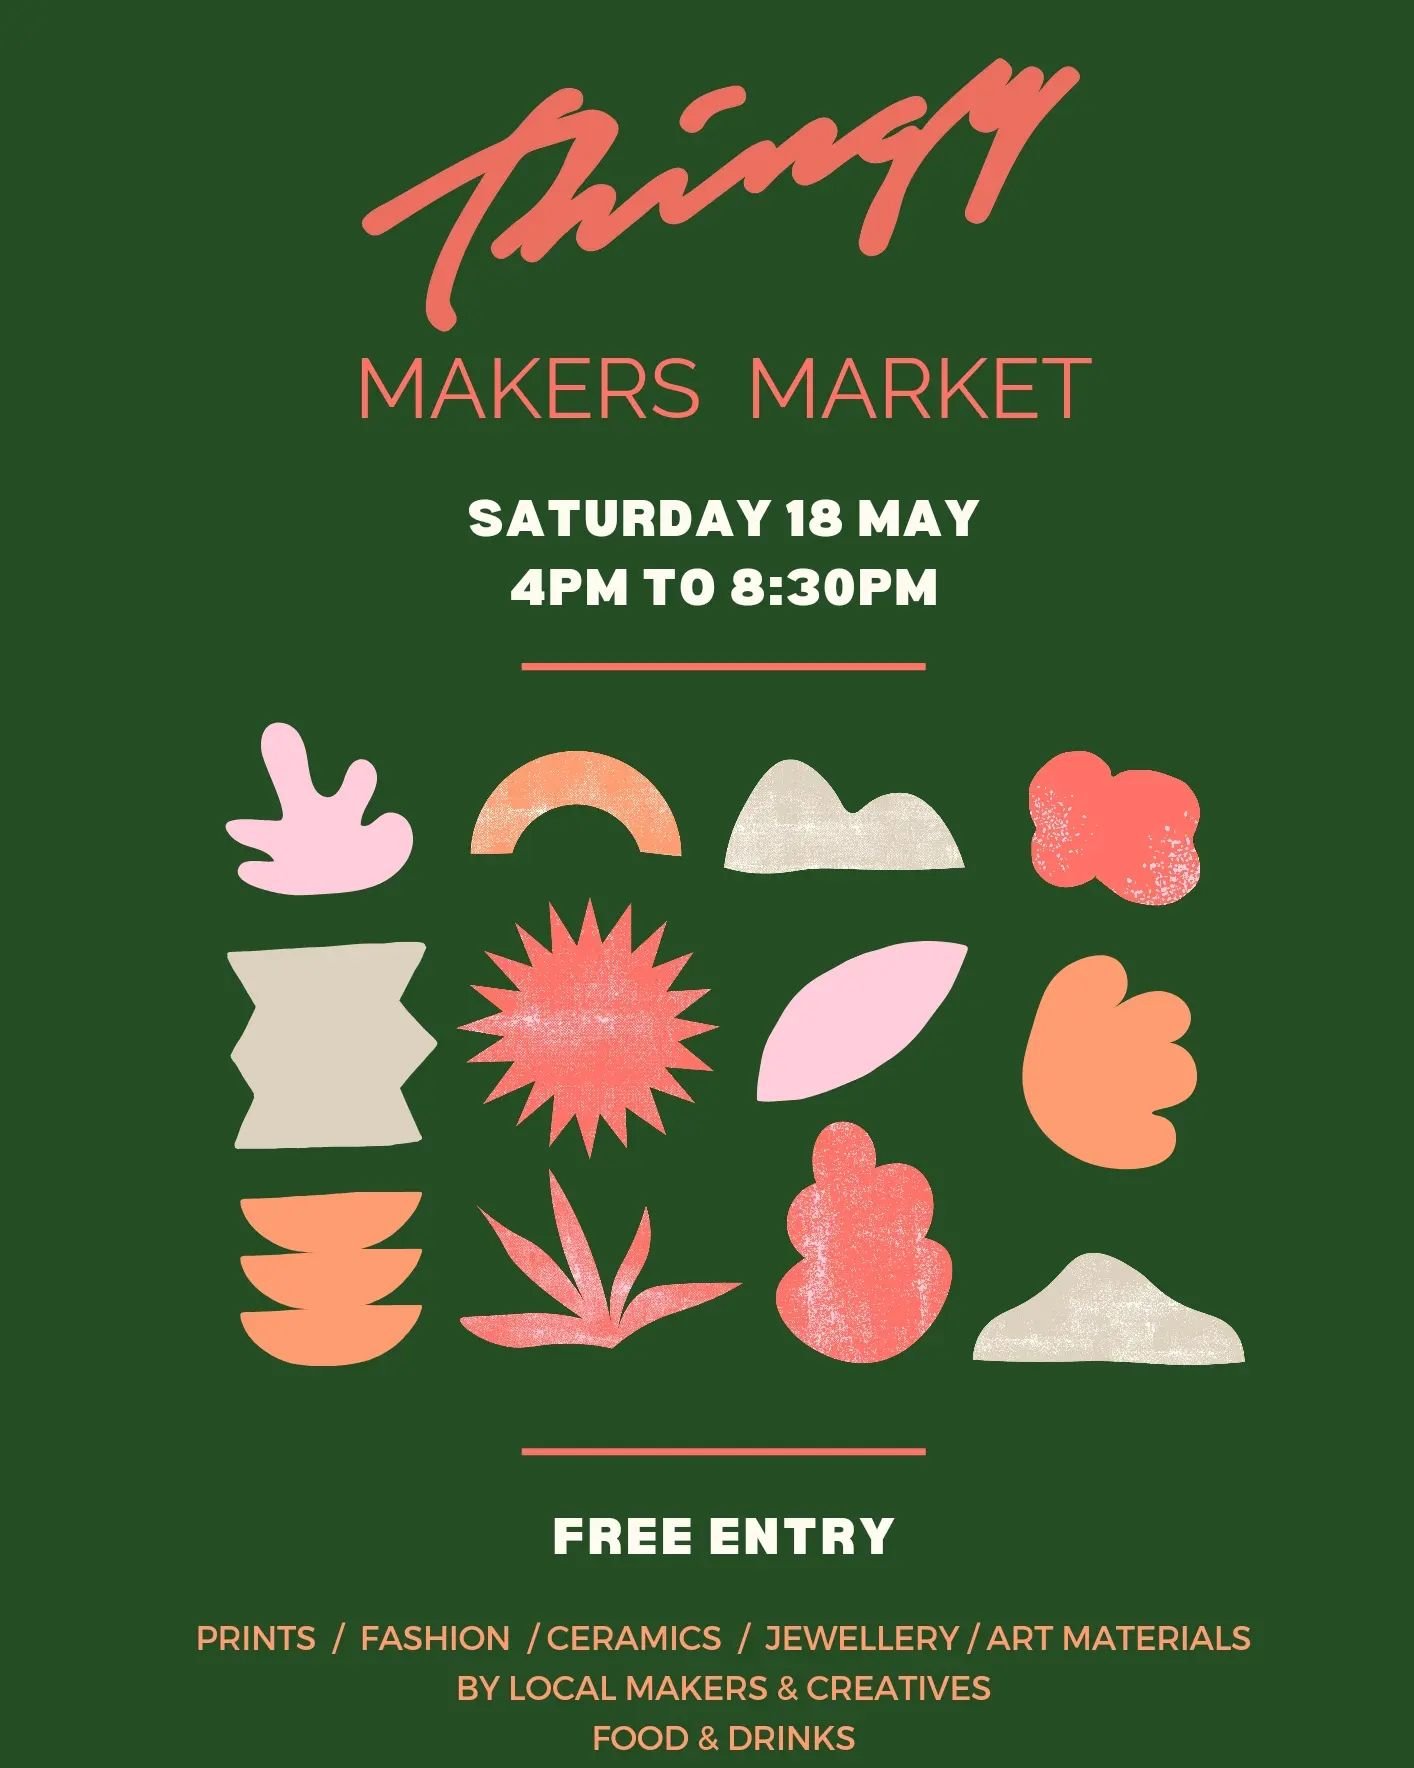 Save the date!
Thingy Makers Market
Saturday 18 May
4pm to 8:30pm
There will be a mix of local makers and designers, alongside cocktails and delicious food.

#HackneyWick #HackneyWickCreatives #HackneyWickEvents #HackneyWickLocals #MakersMarket